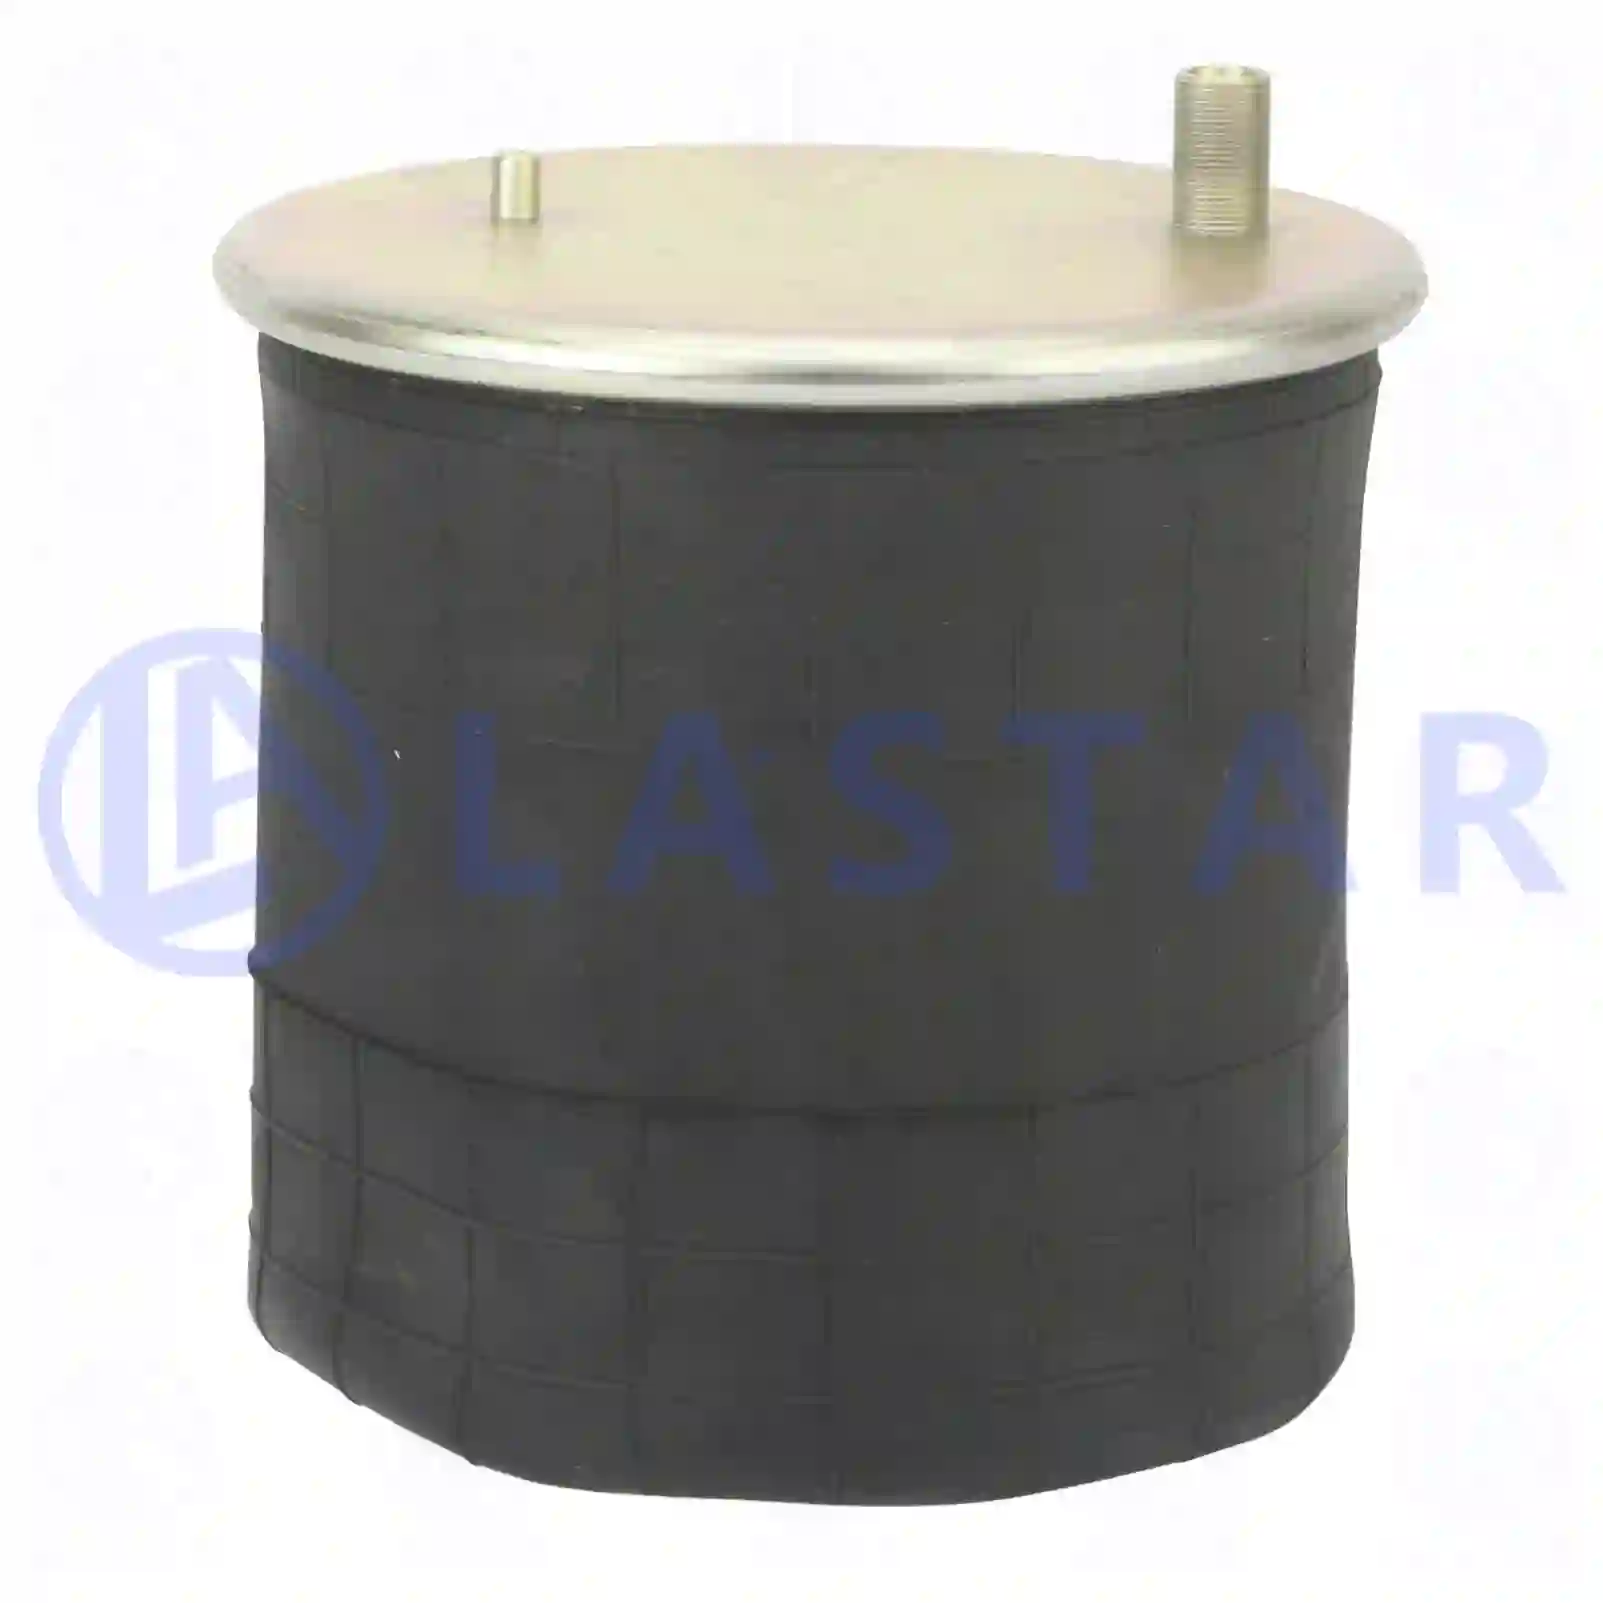 Air spring, with steel piston, 77727041, 5010557355, 7422025556, 20722412, 22025568, ZG40791-0008 ||  77727041 Lastar Spare Part | Truck Spare Parts, Auotomotive Spare Parts Air spring, with steel piston, 77727041, 5010557355, 7422025556, 20722412, 22025568, ZG40791-0008 ||  77727041 Lastar Spare Part | Truck Spare Parts, Auotomotive Spare Parts